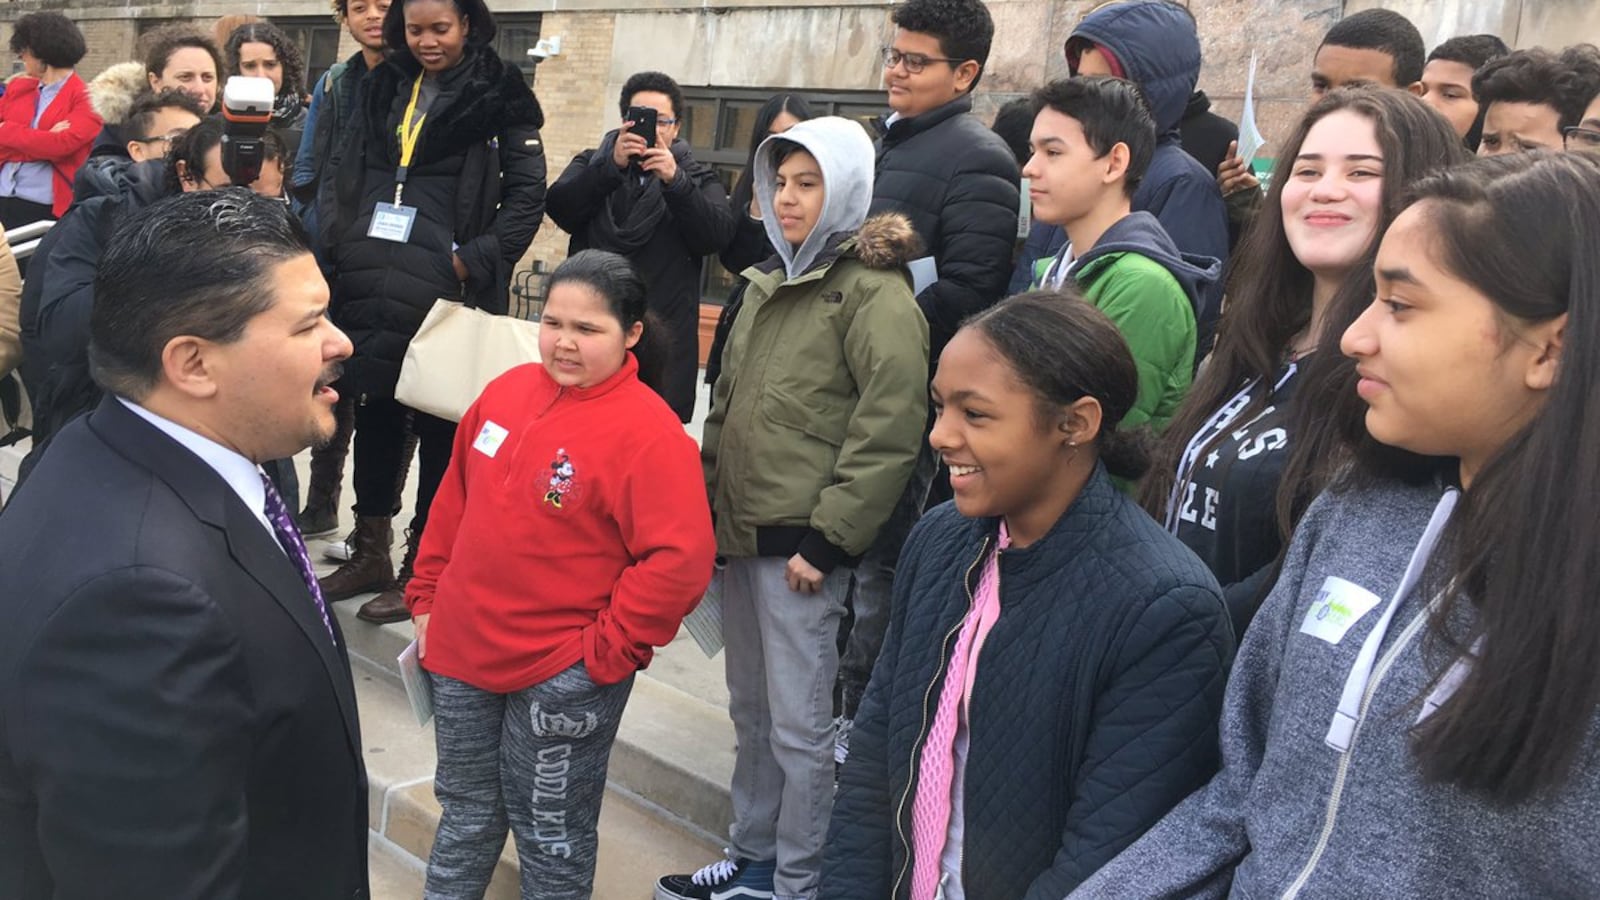 Chancellor Richard Carranza meets with middle school students on a college tour.